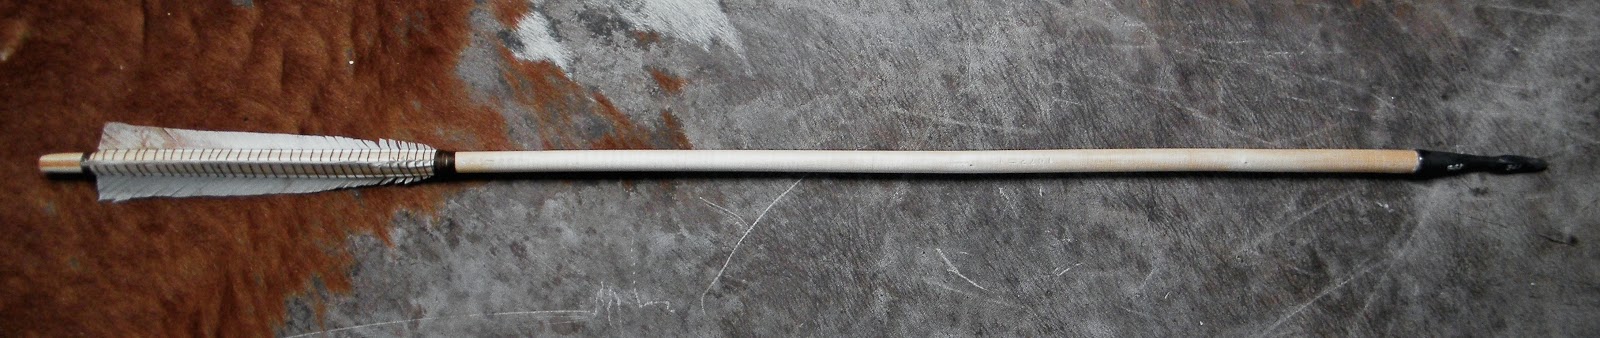 ARTICLE -WAR ARROW FROM ASH TREE ROOT SHOOT